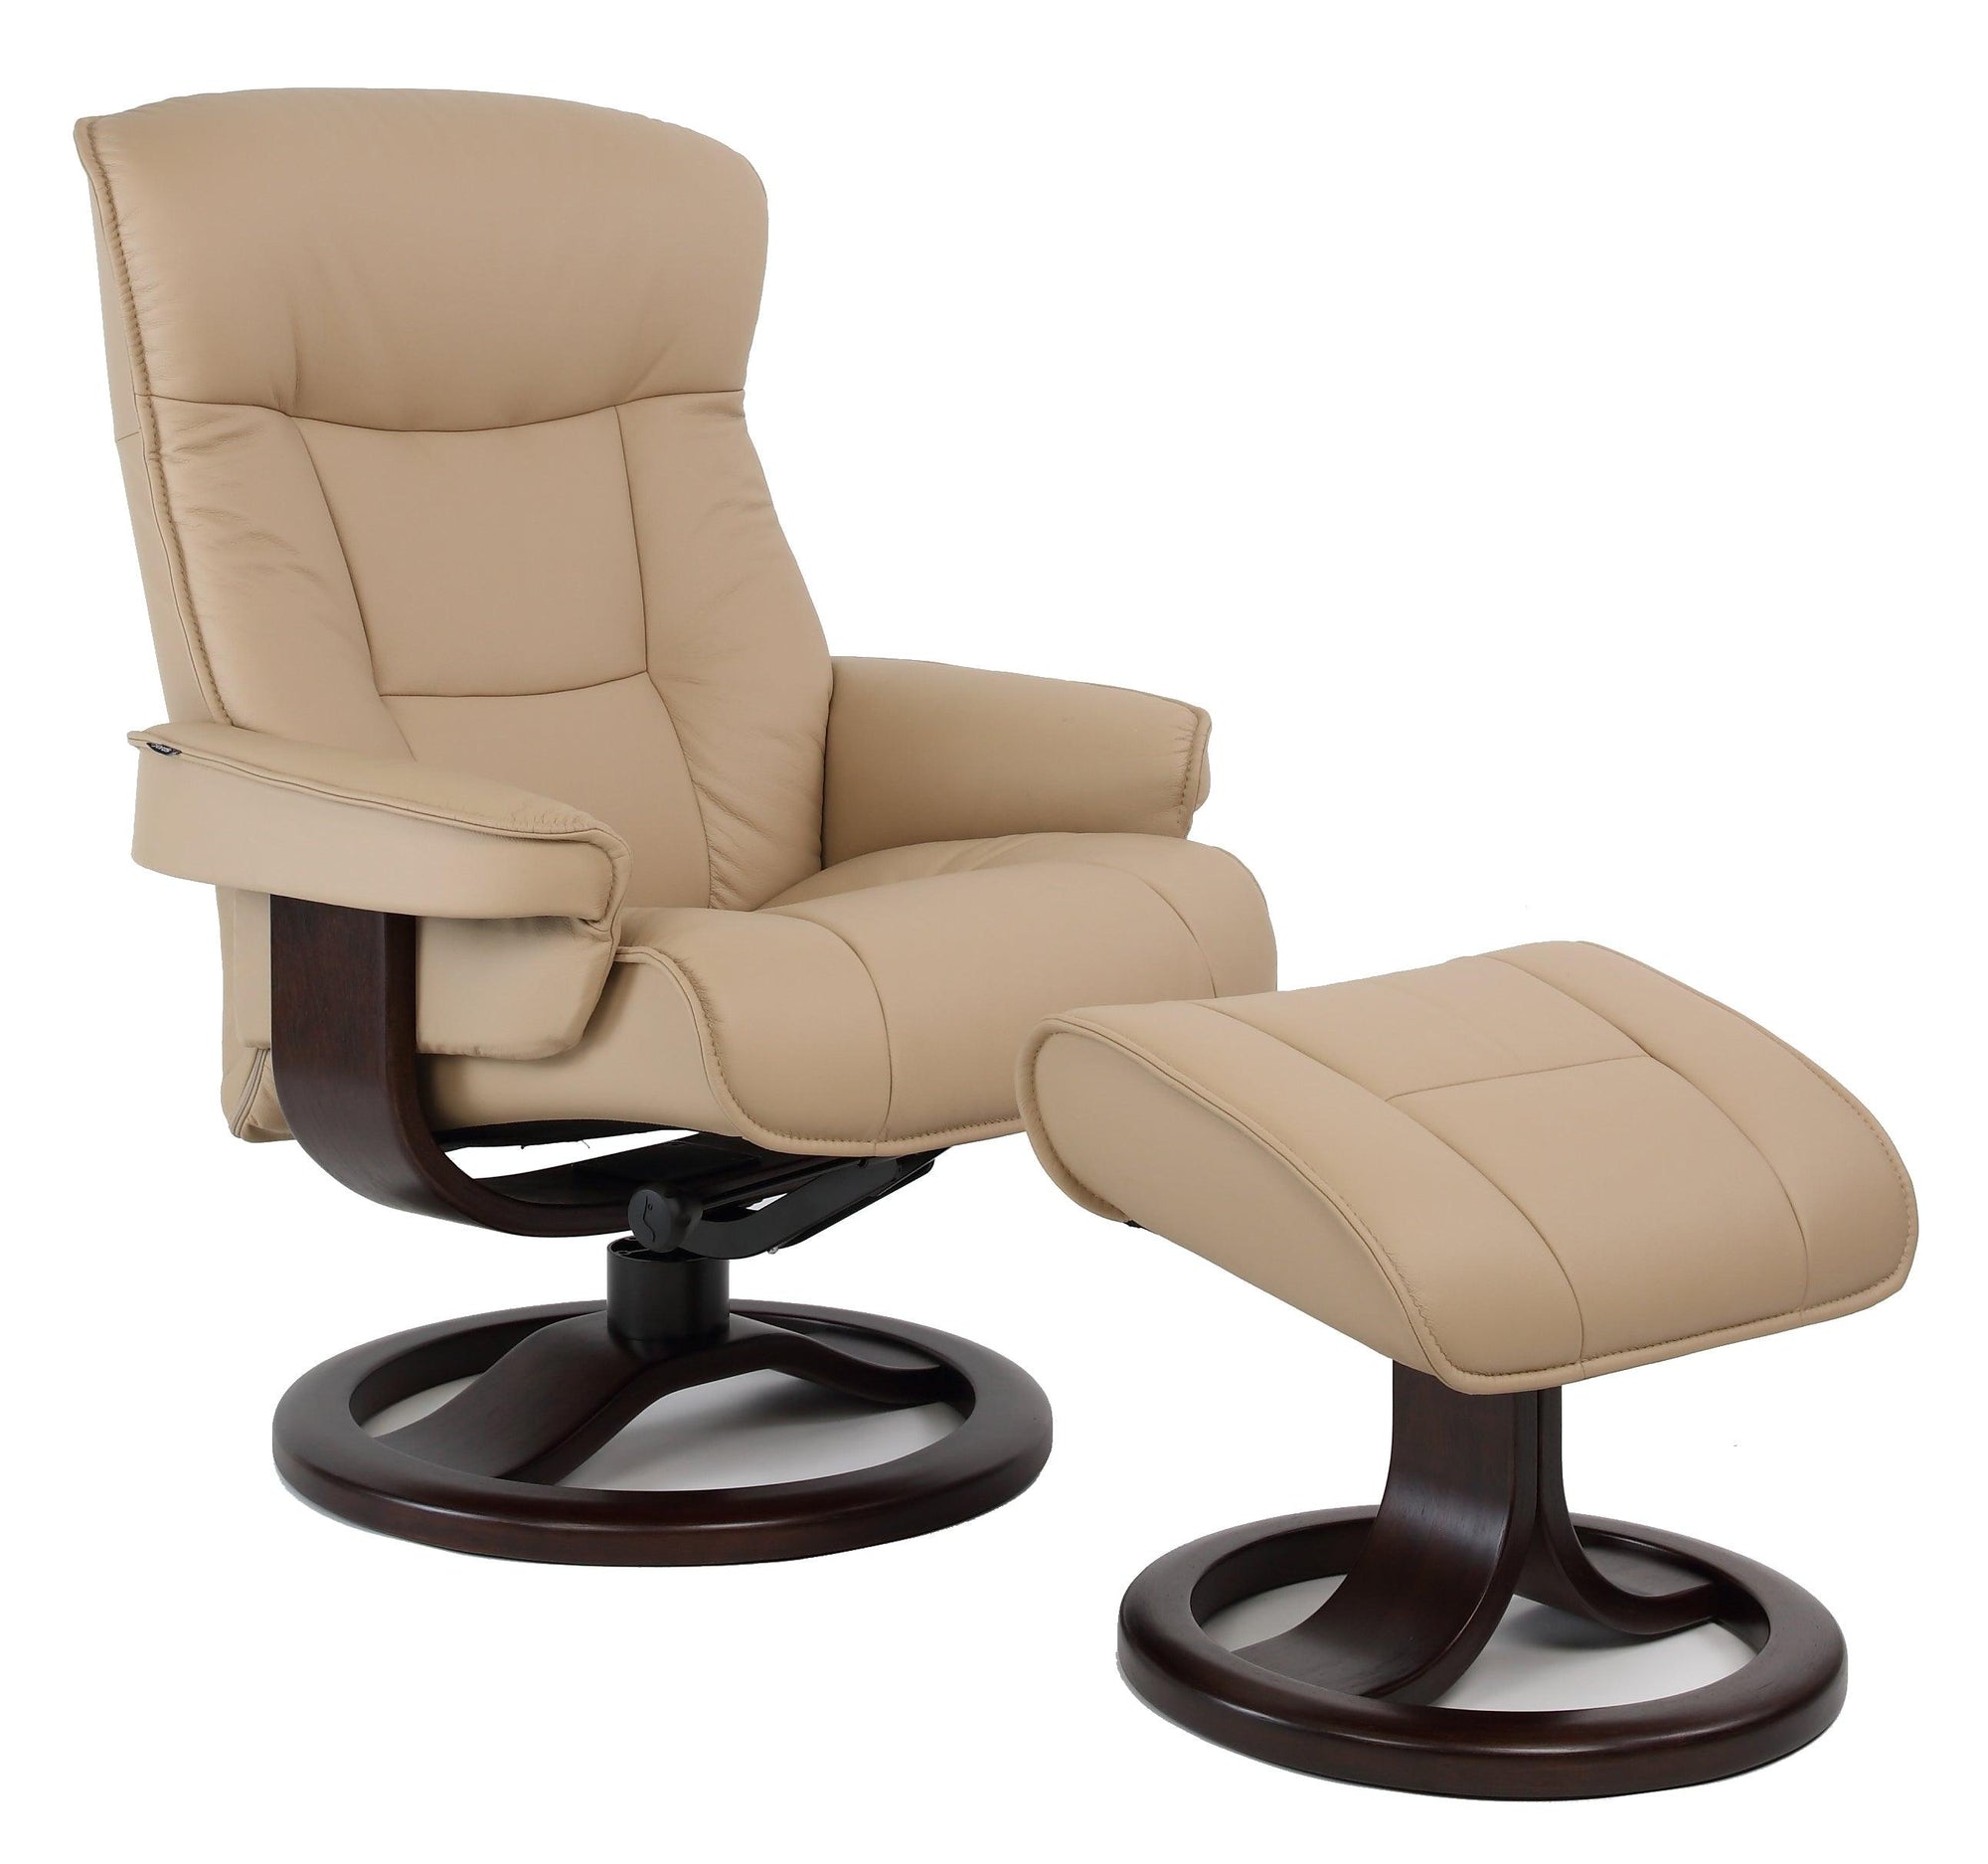 Mustang R Leather Reclining Euro Chair Furniture - Living